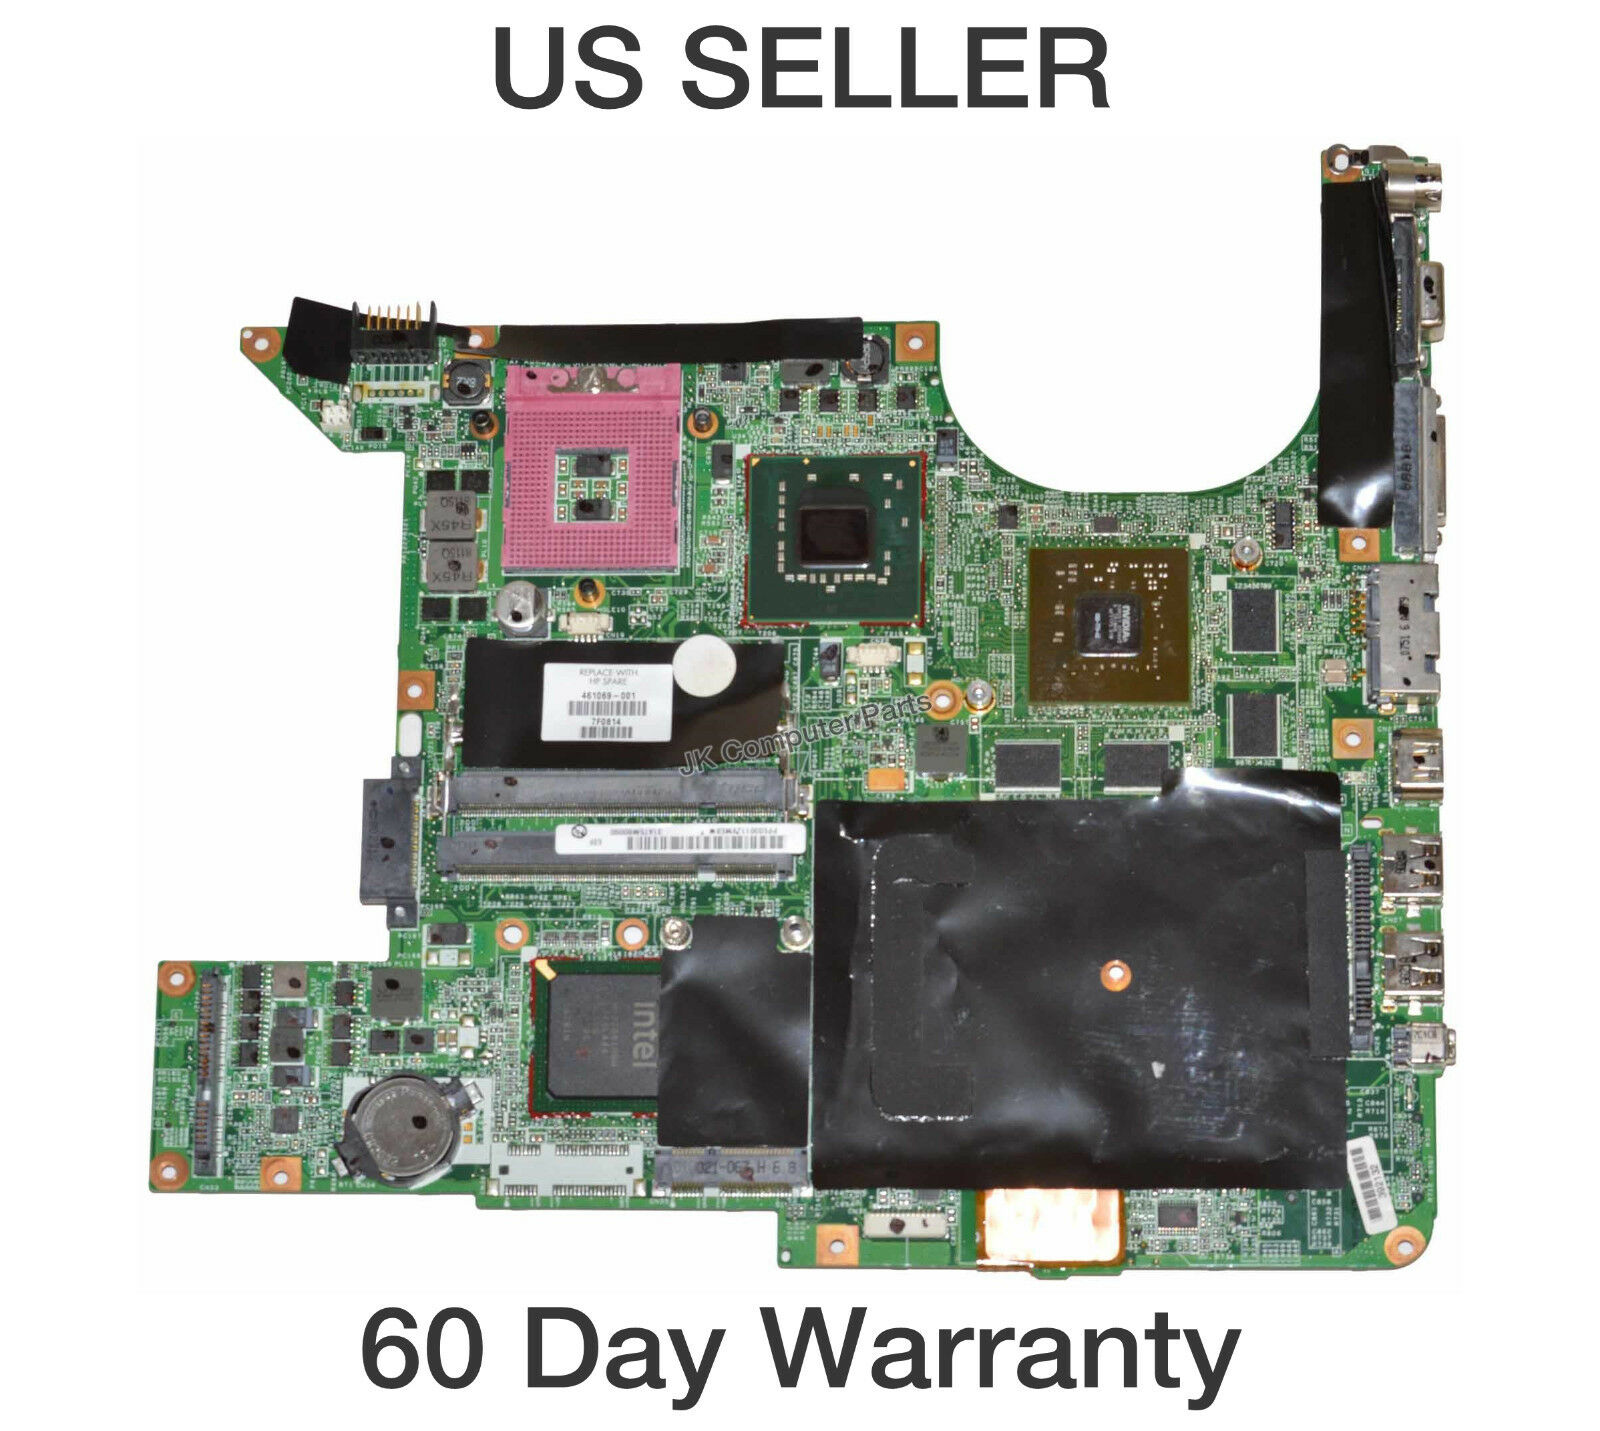 HP Pavilion DV9747 DV9748 DV9749 DV9750 DV9757 DV9760 Motherboard 461069-001 This motherboard is tested and - Click Image to Close